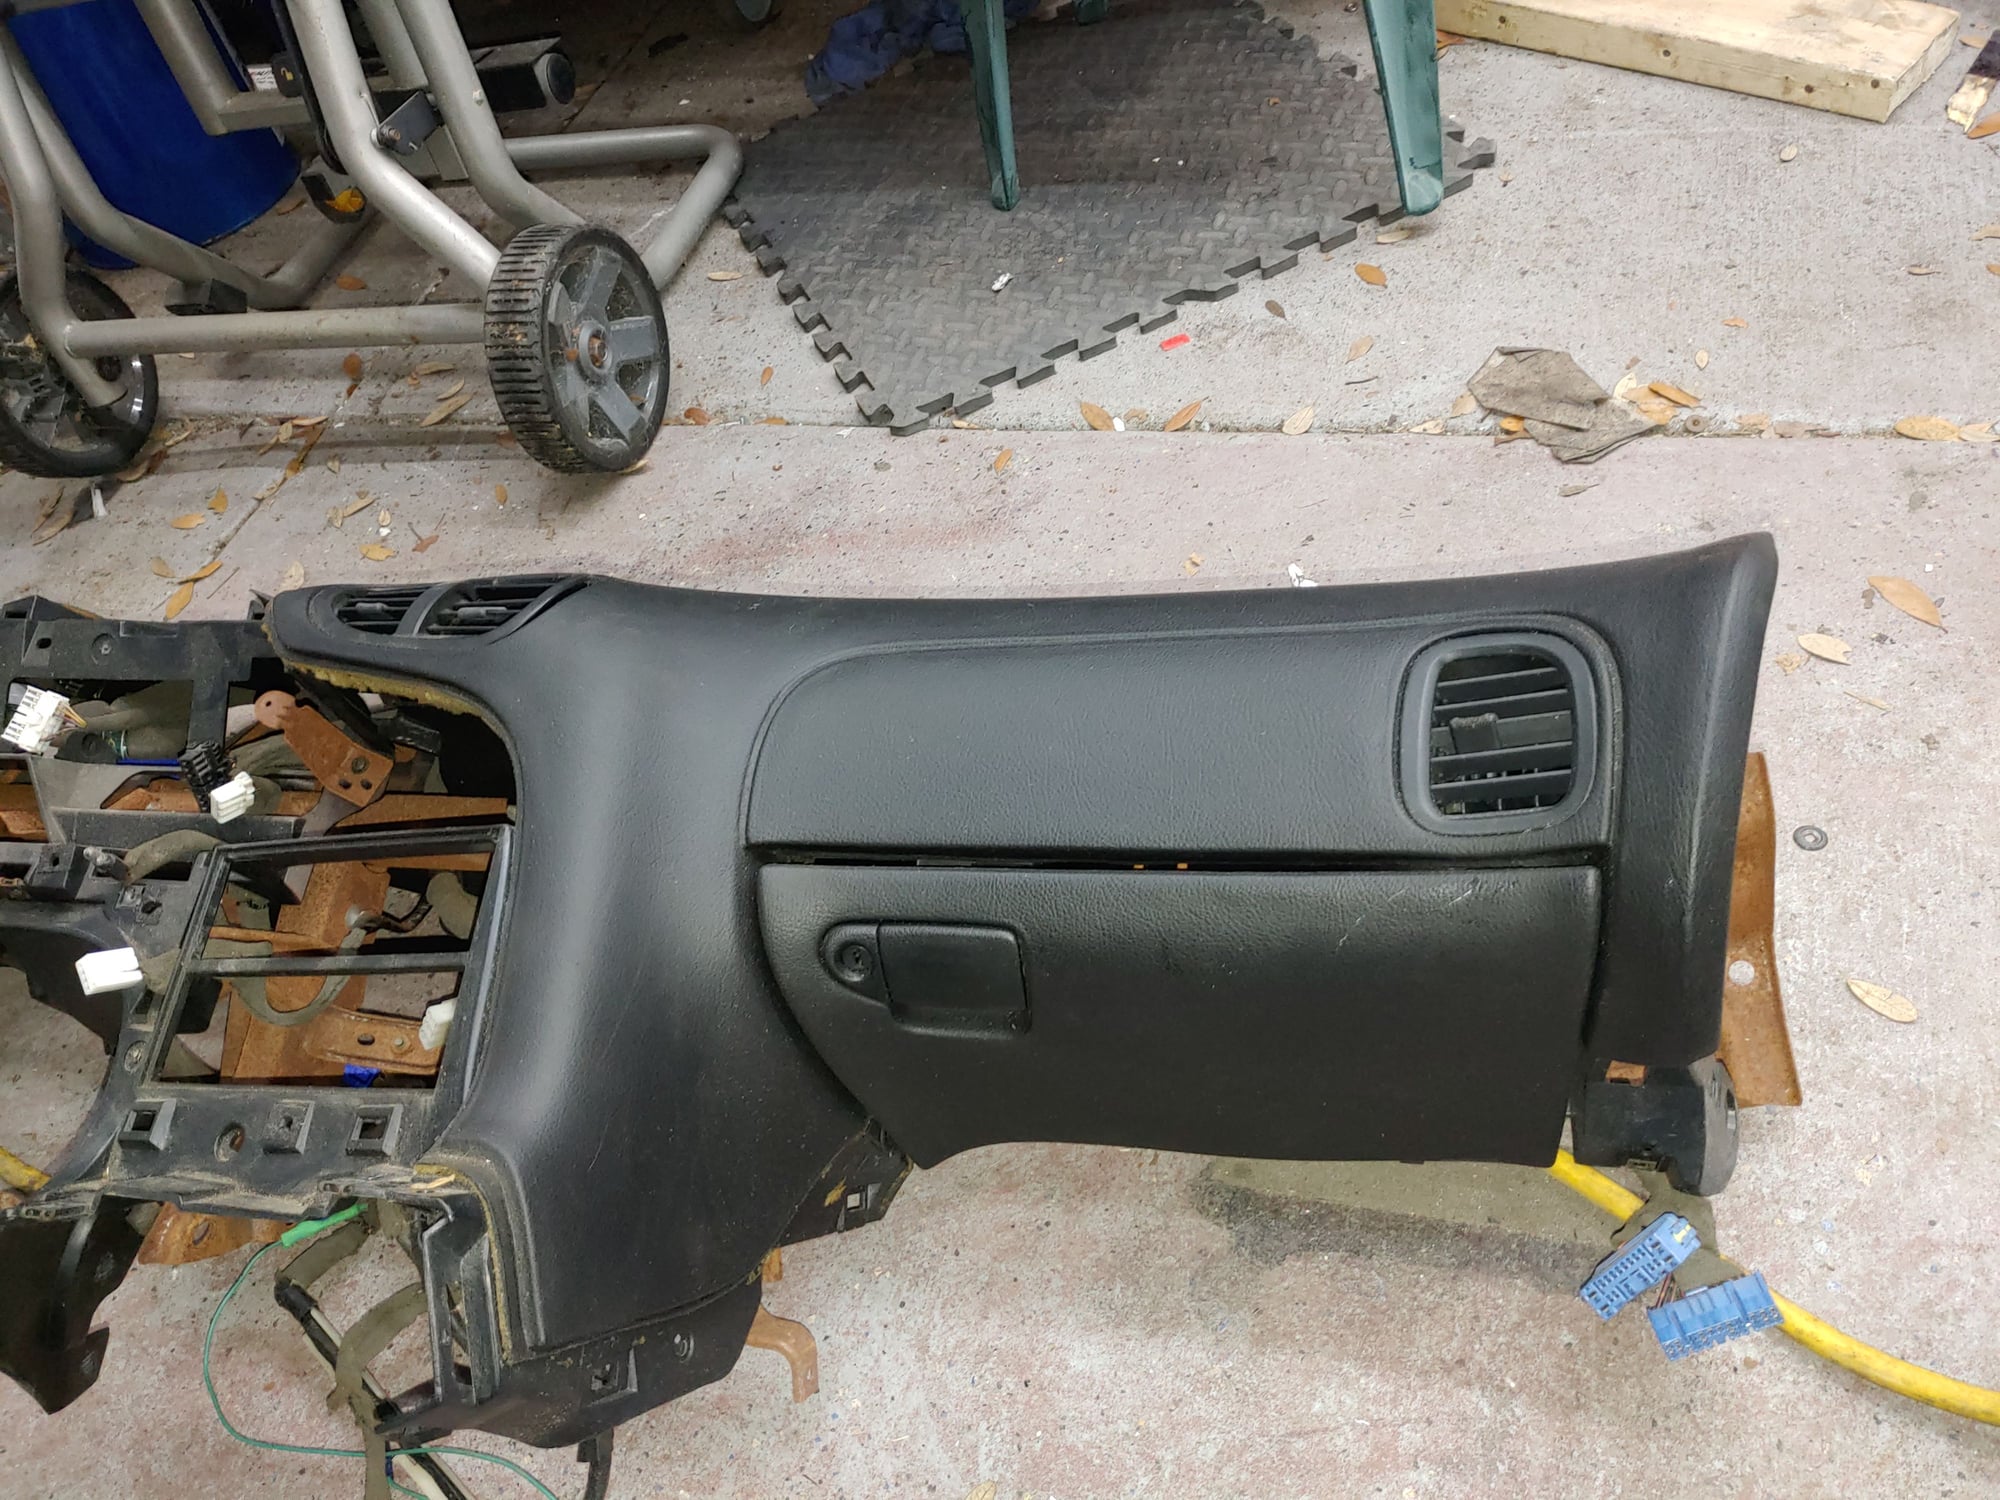 Interior/Upholstery - 1993 FD - LHD Dash - Included Wiring, Dash Bar, Glove Box, Center + Passenger Vent - Used - 1993 to 1995 Mazda RX-7 - Tampa, FL 34610, United States